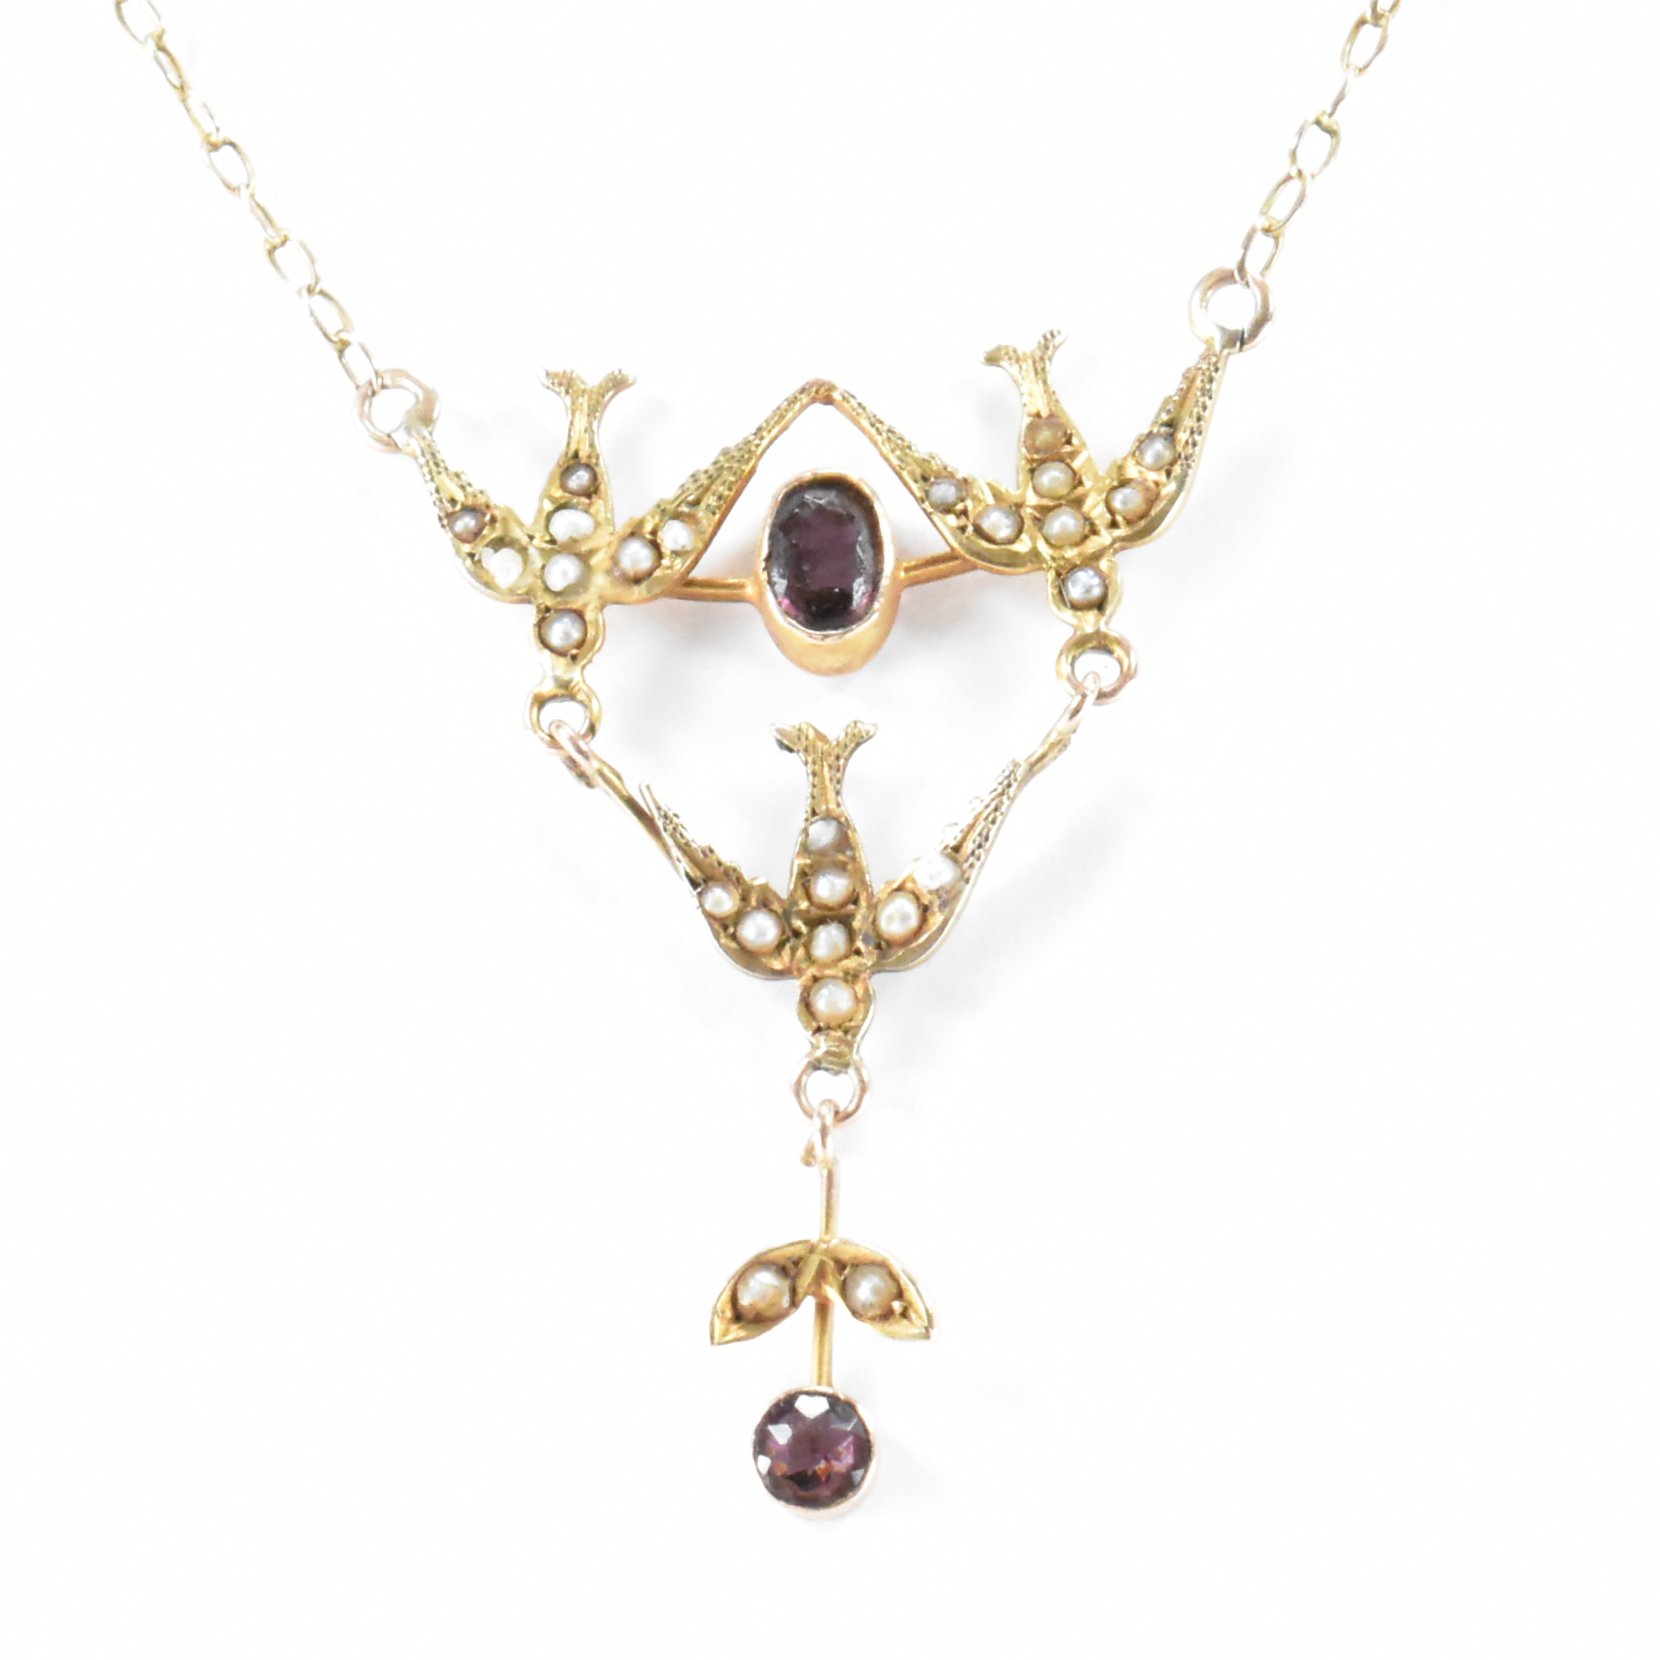 VICTORIAN GOLD SEEDPEARL & PASTE SWALLOW NECKLACE